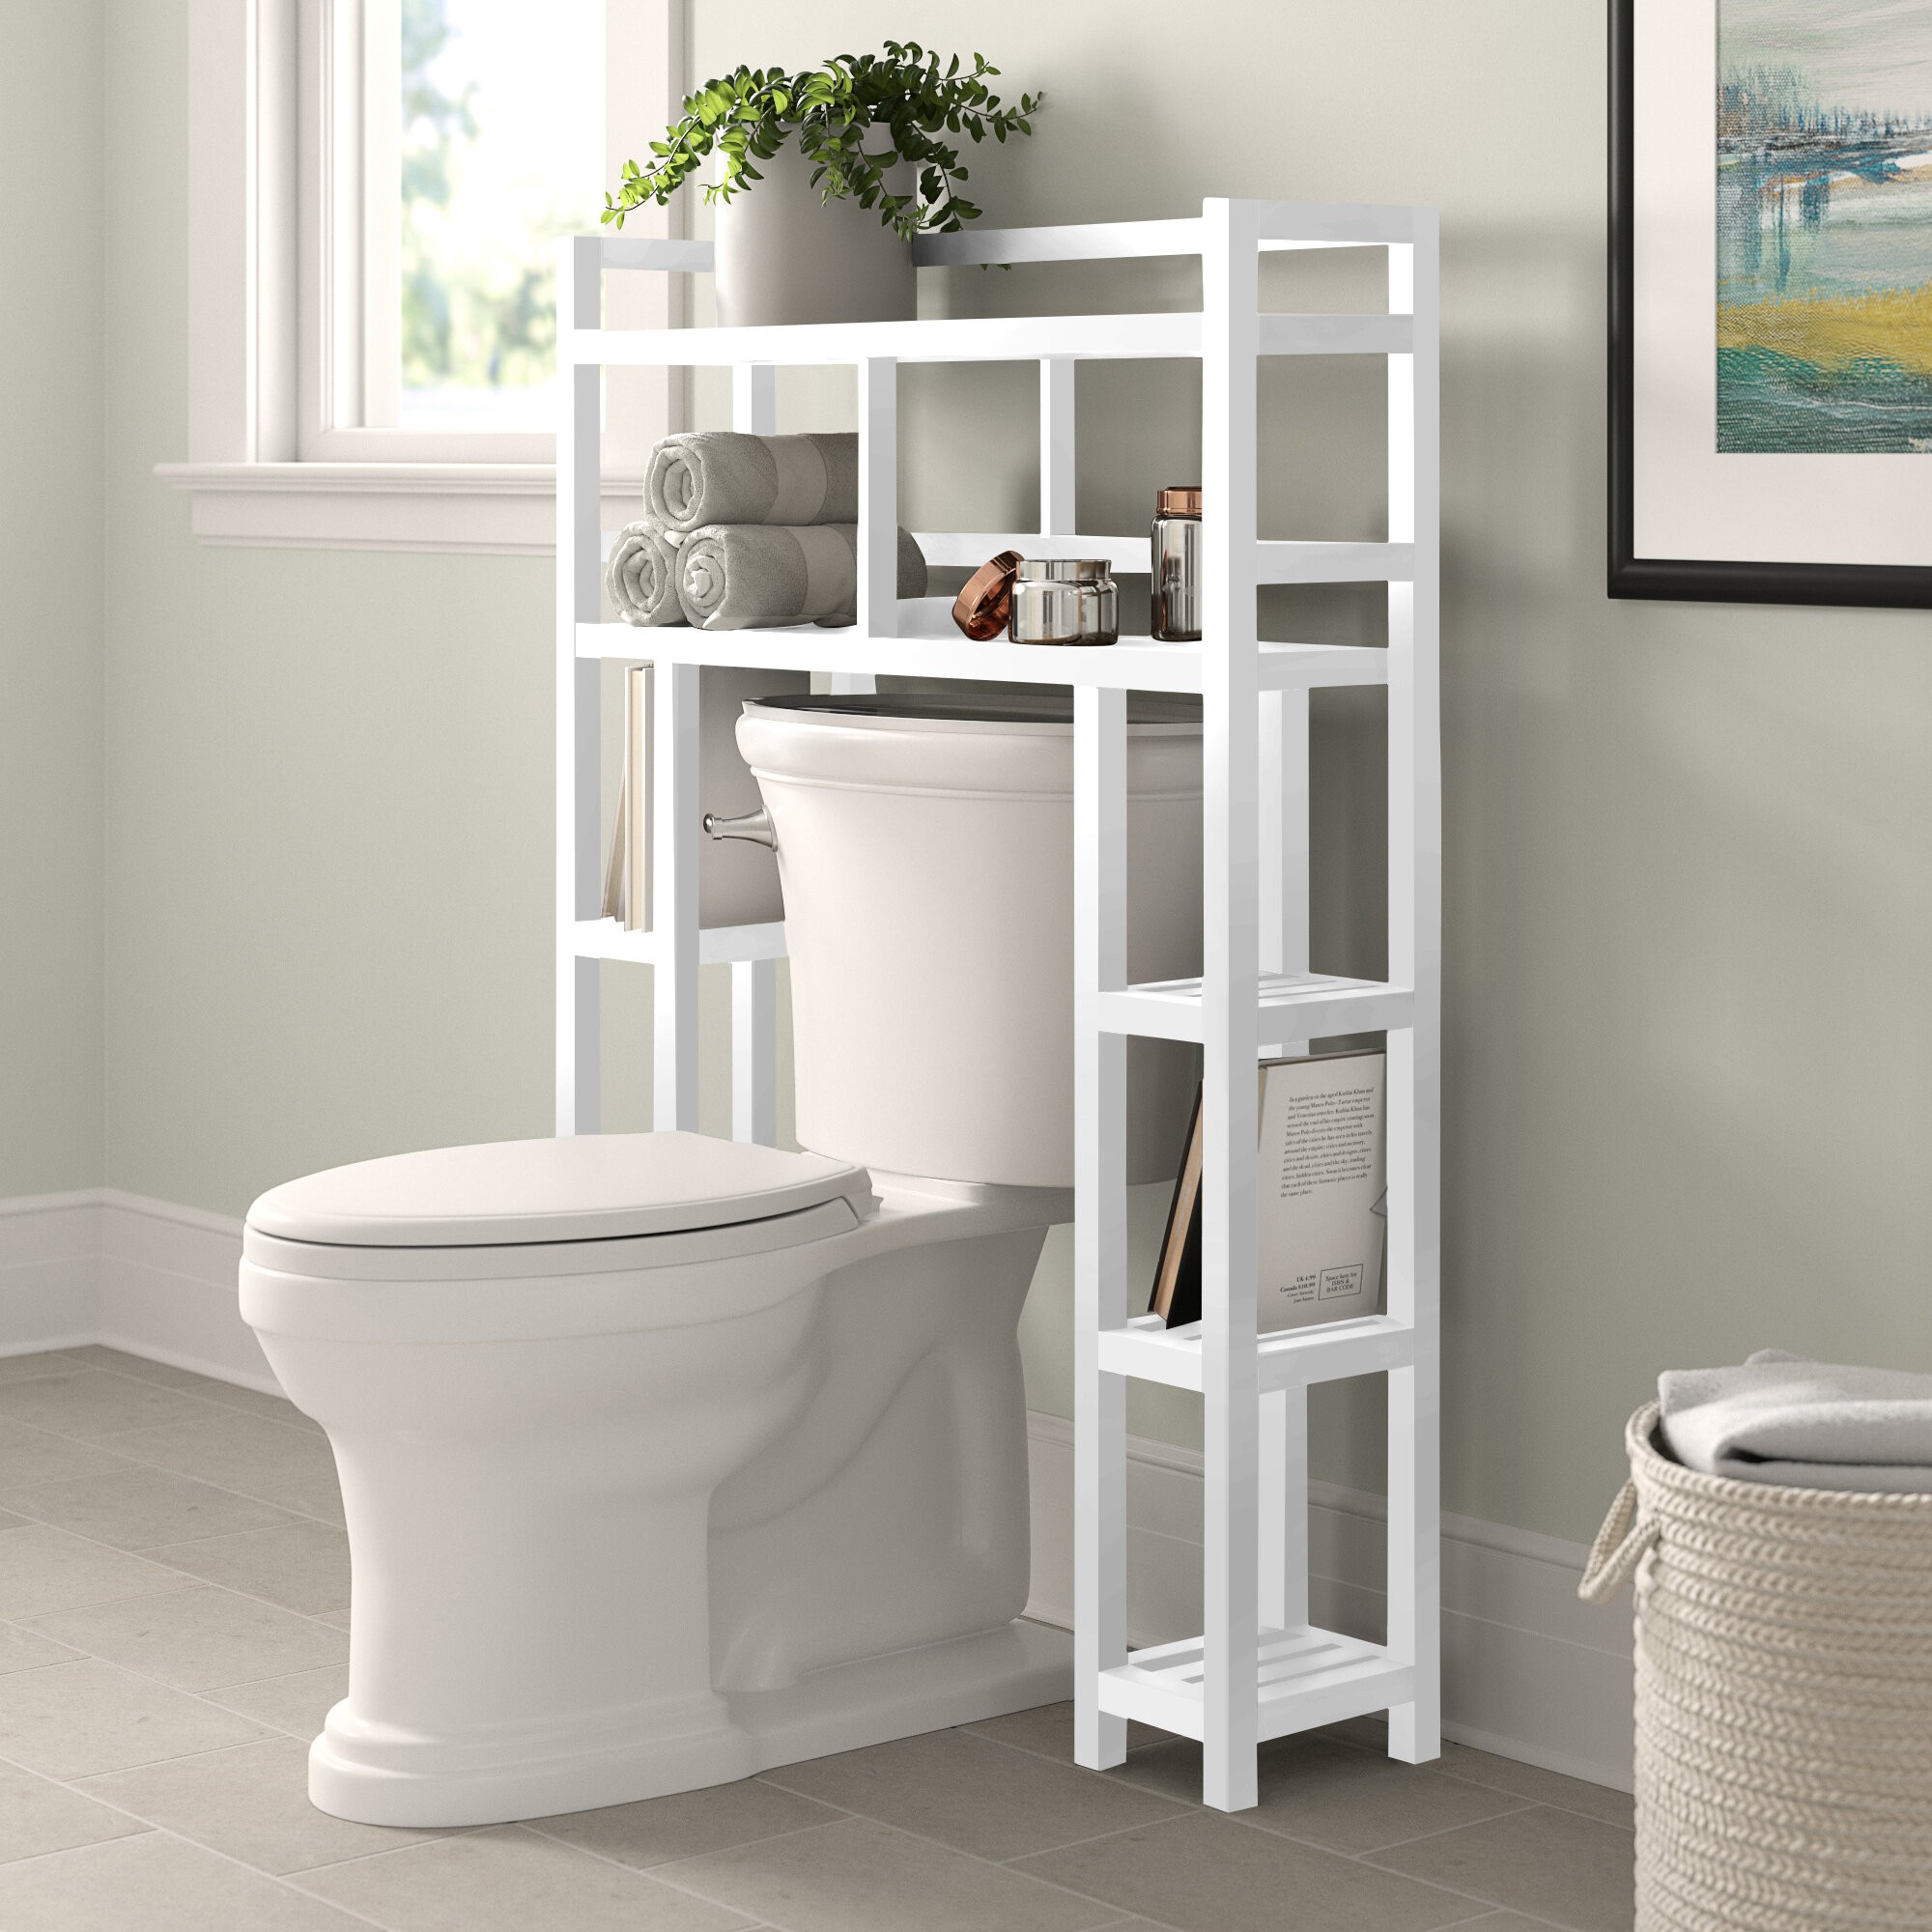 Bernardston 34.5" W x 48" H x 9" D Solid Wood Free-Standing Over-the-Toilet Storage